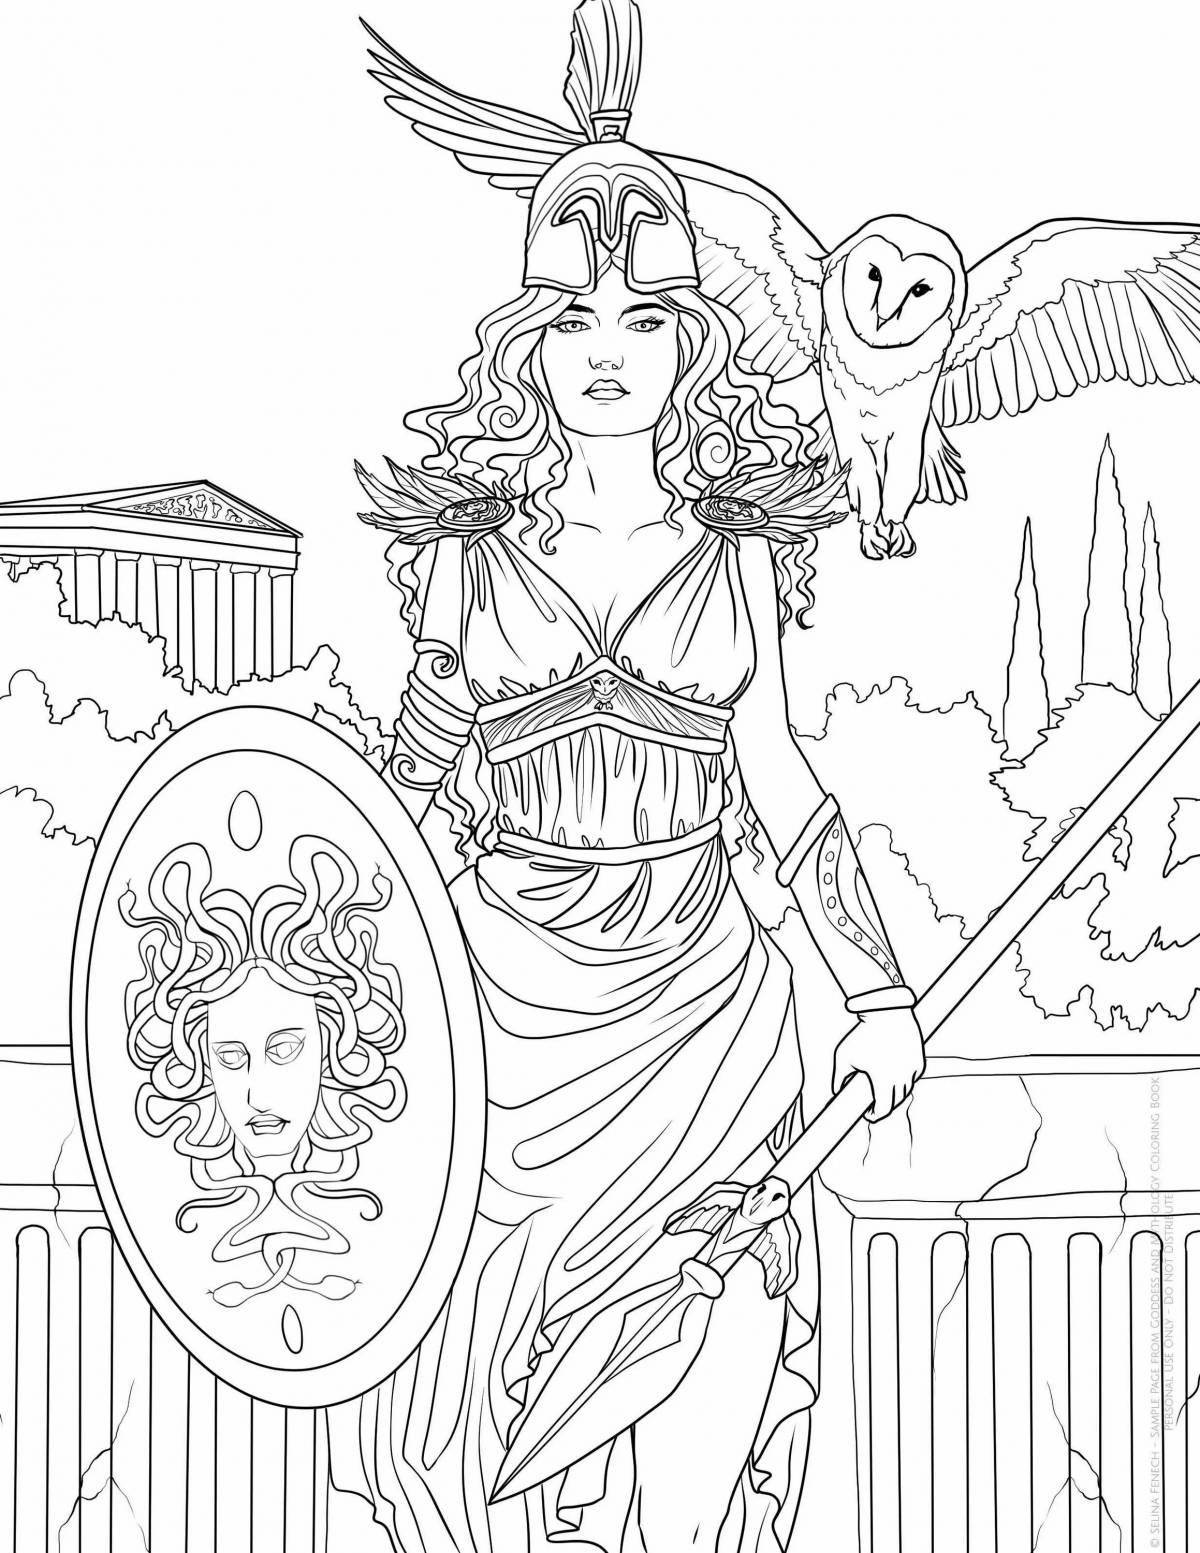 Delightful coloring of ancient Greek myths